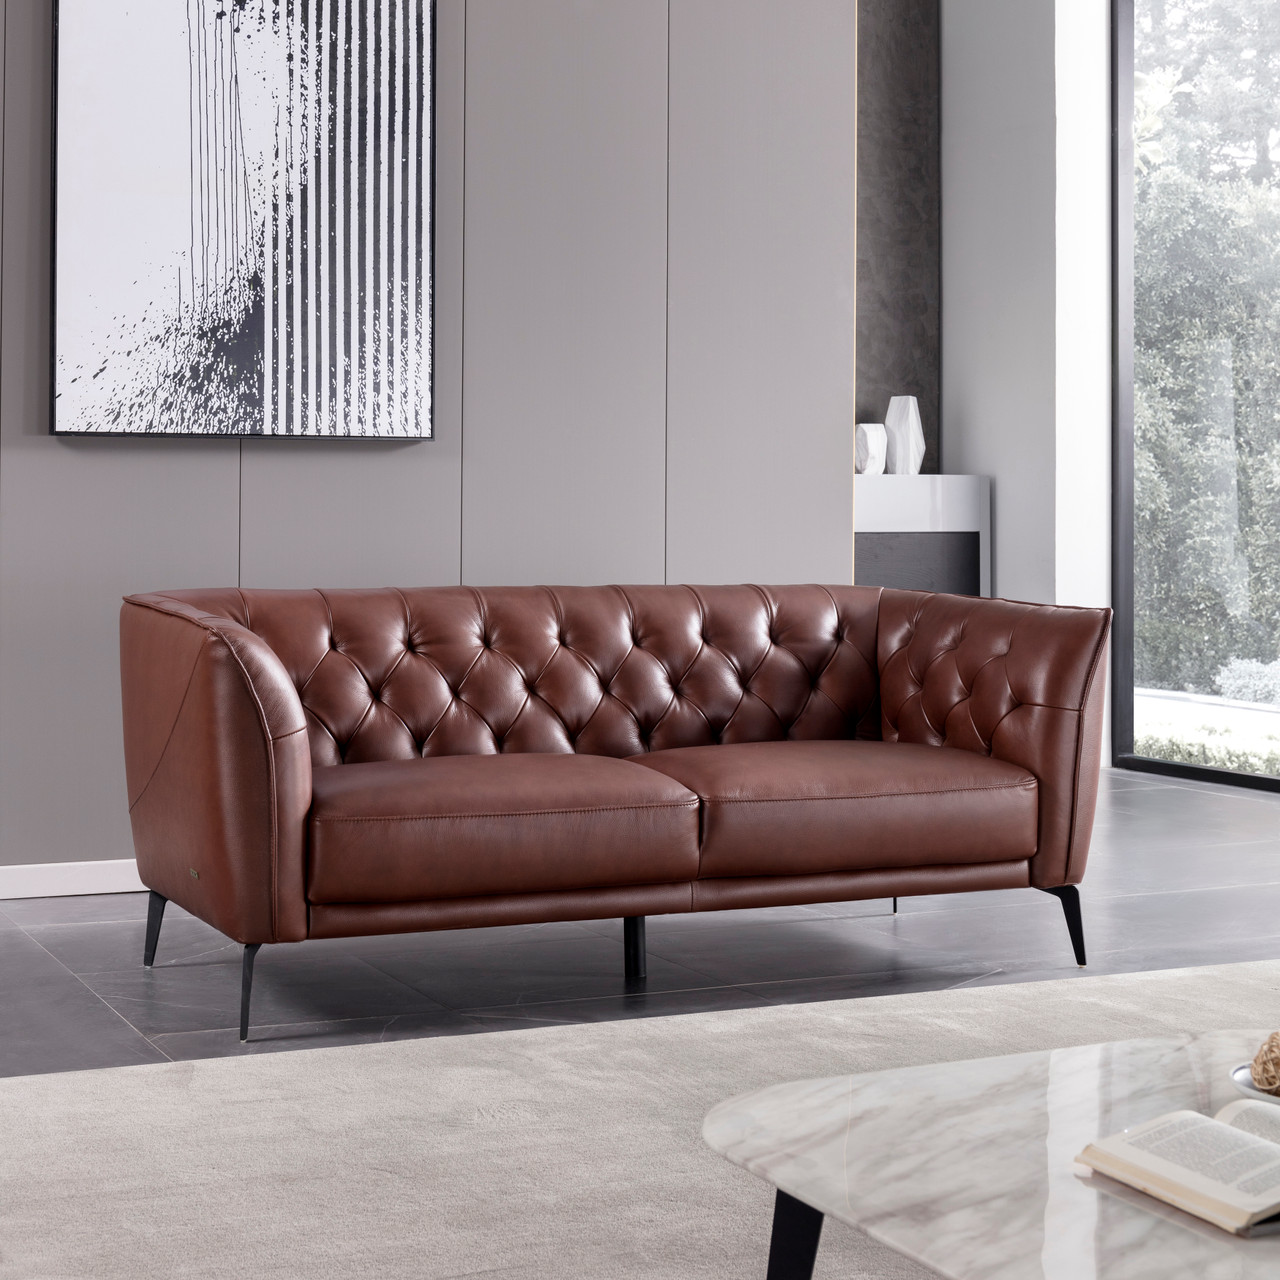 Brown Leather Contemporary Living Room Set with Metal Legs